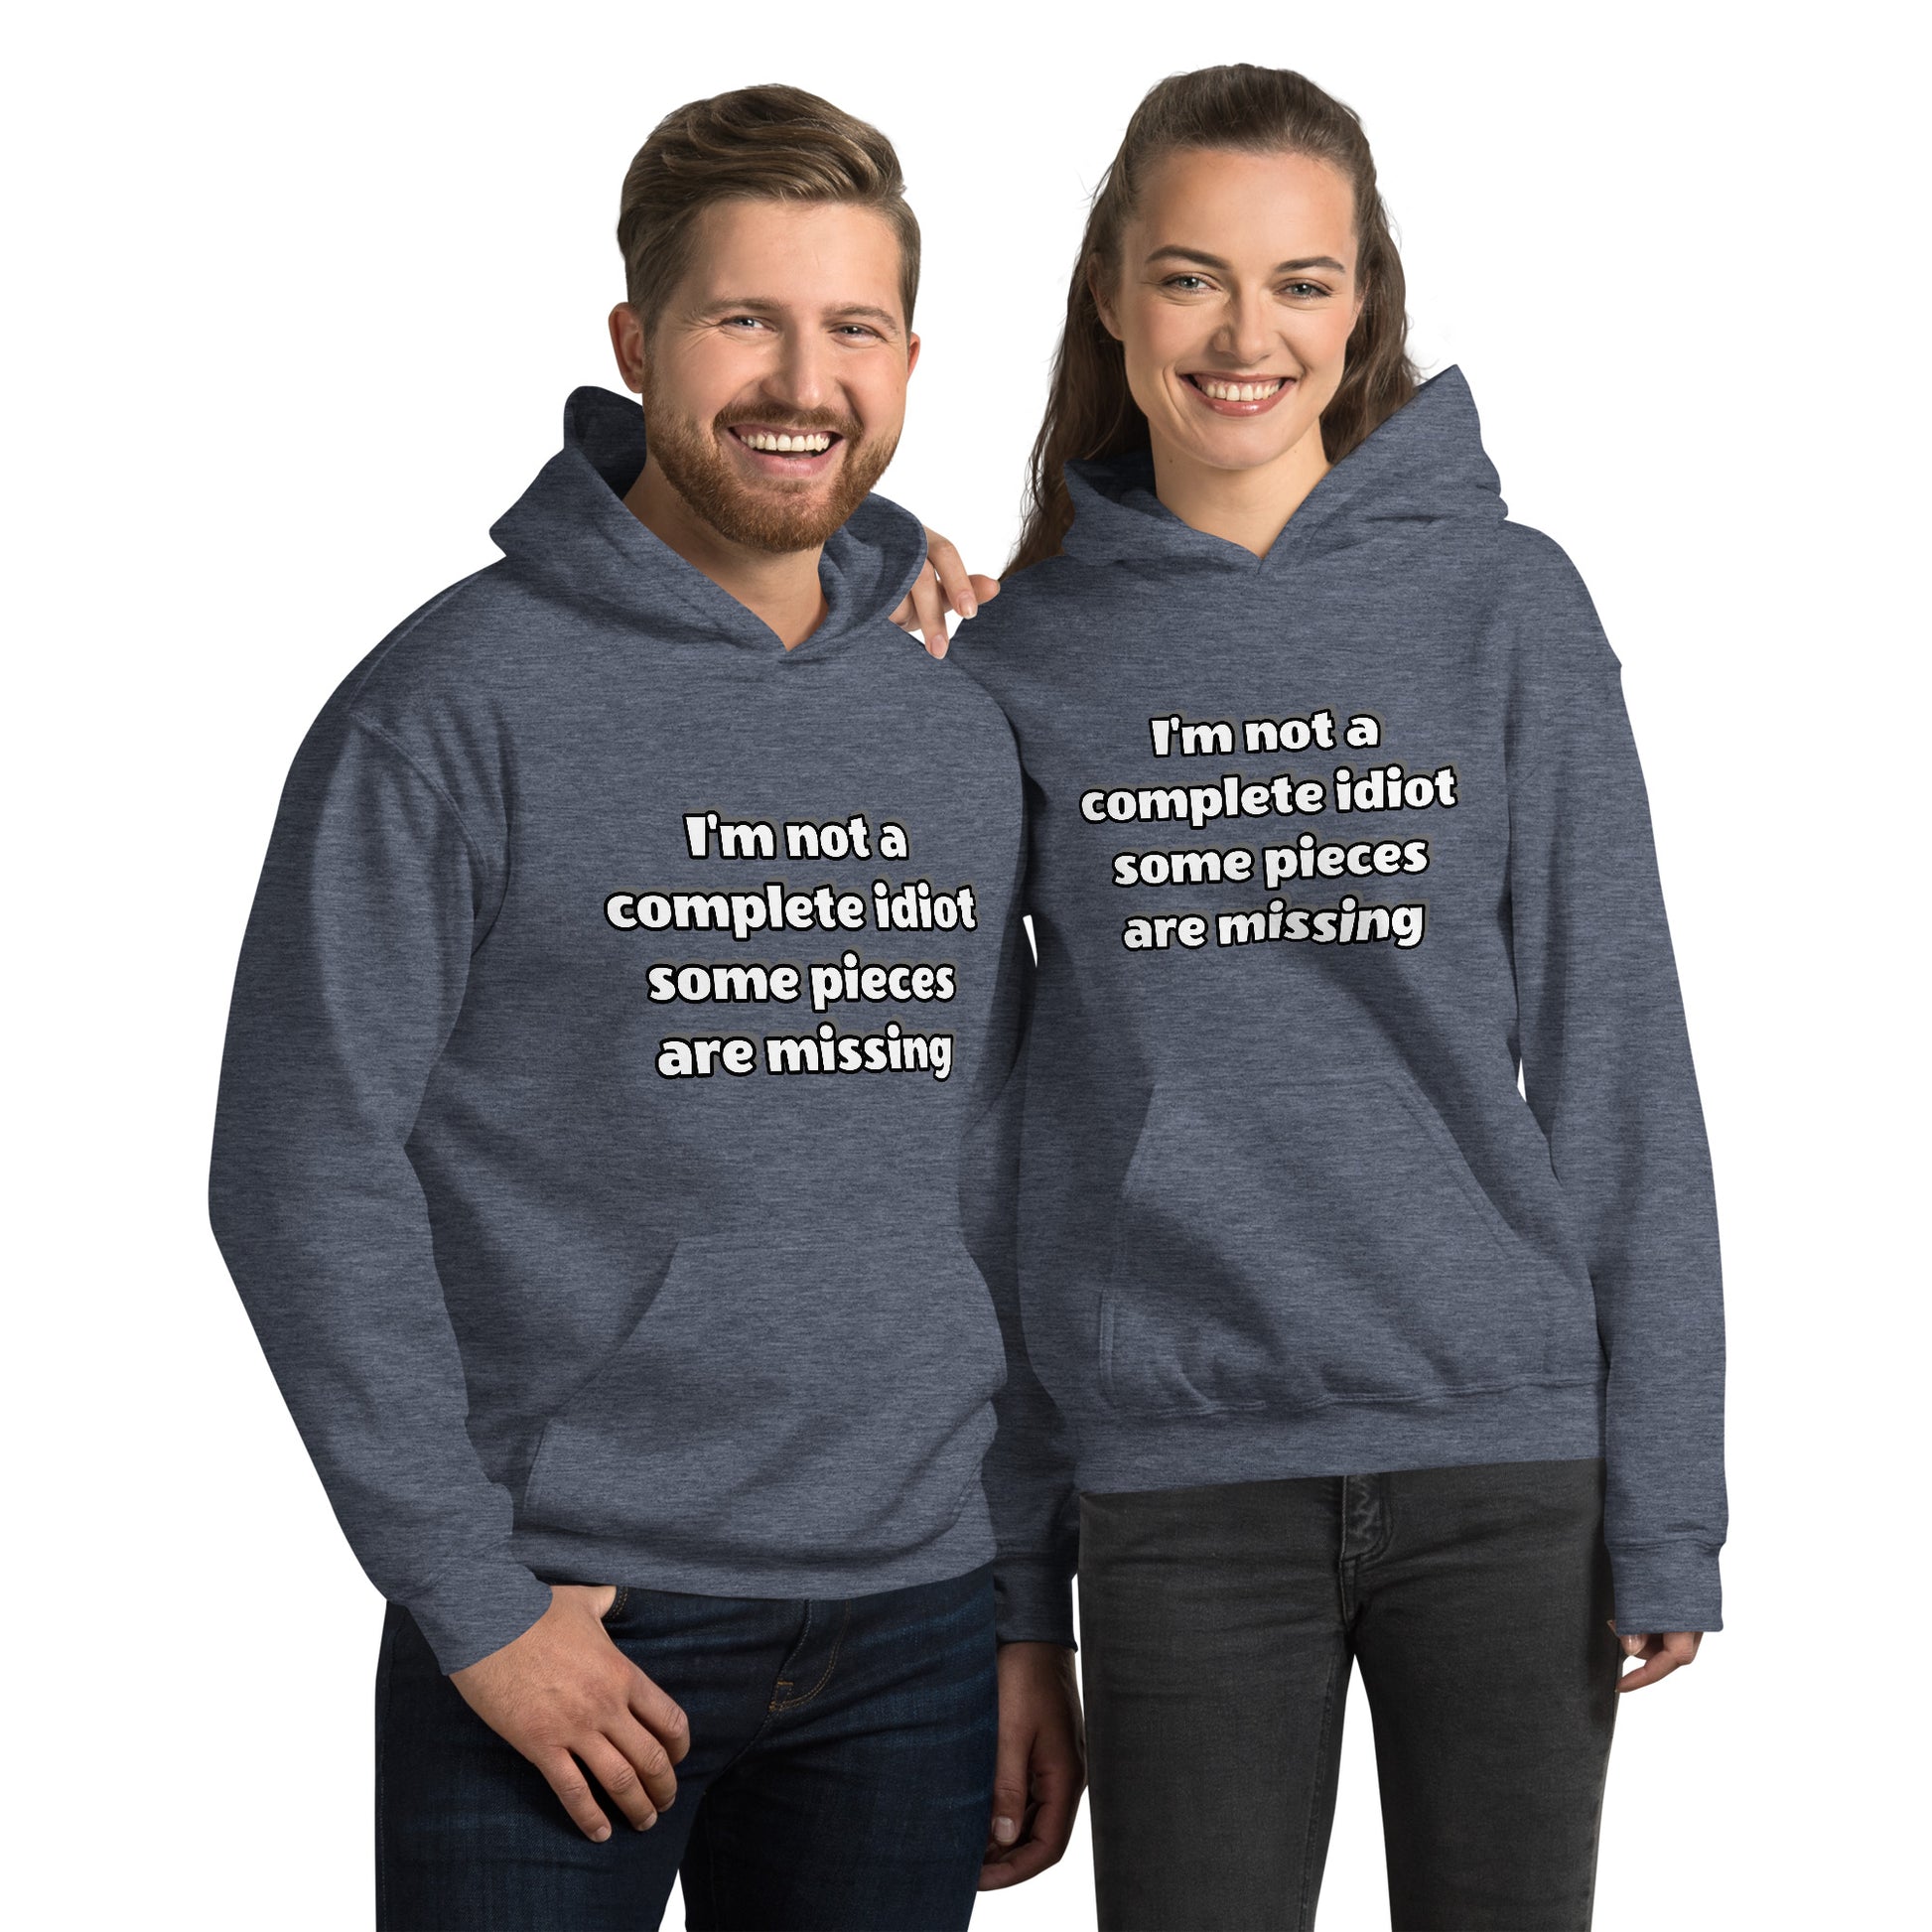 Men and women with navy blue hoodie with text “I’m not a complete idiot, some pieces are missing”